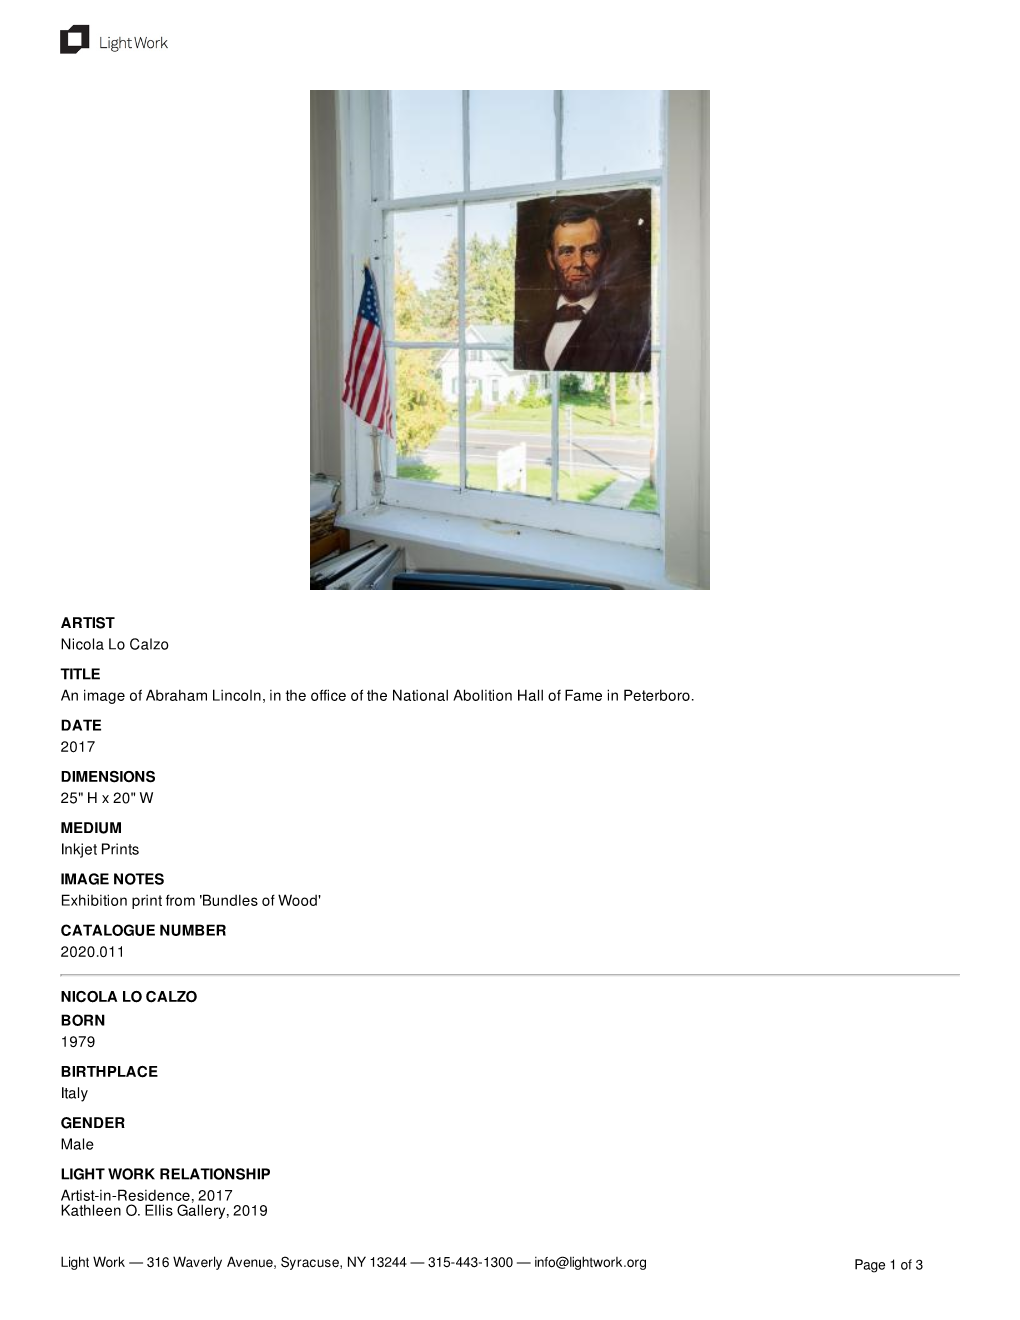 Summary for an Image of Abraham Lincoln, in the Office of the National